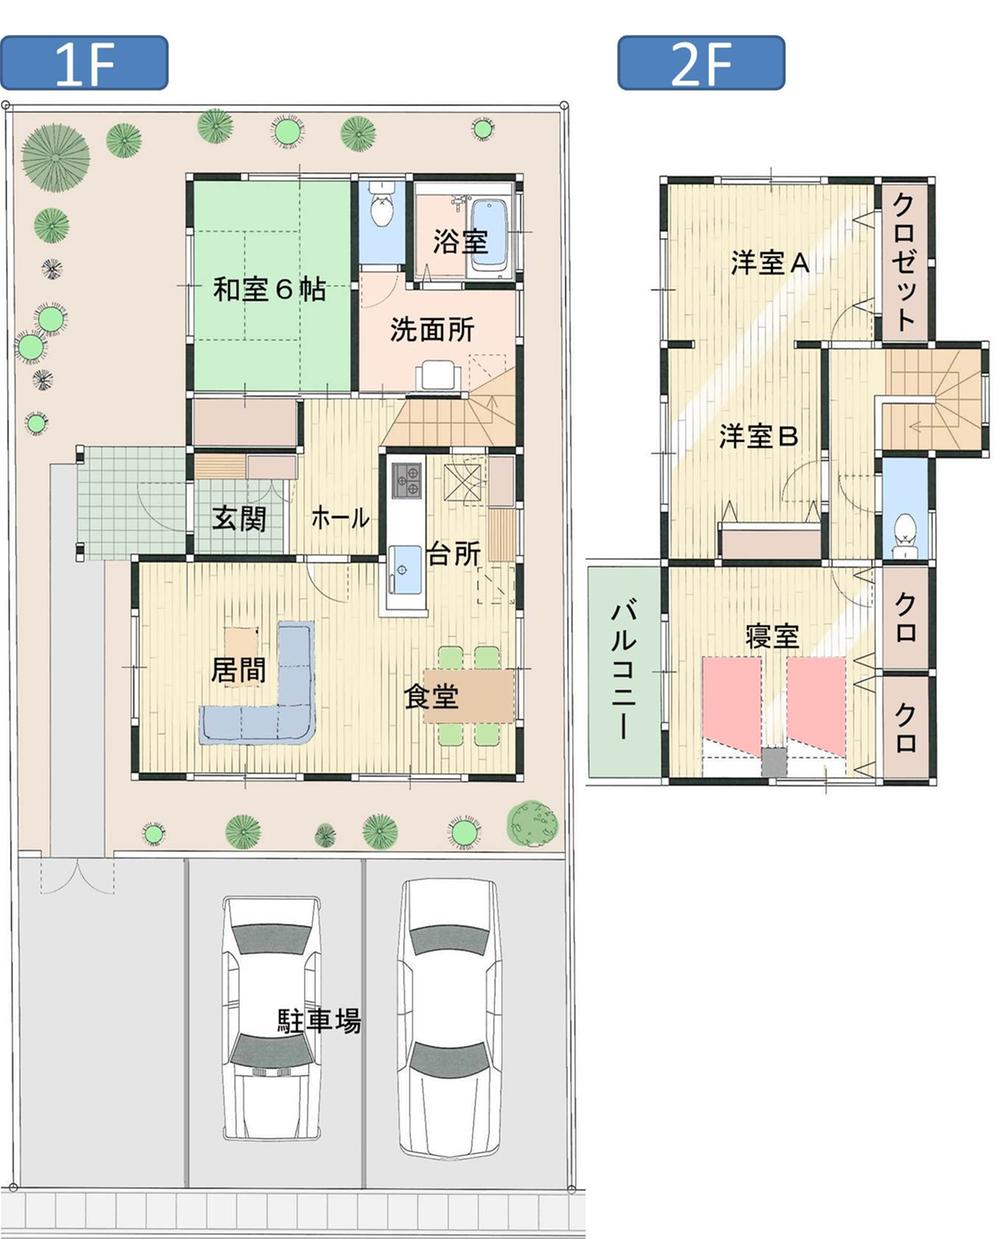 Other building plan example. Plan example of No. 2 destination (northeast corner lot). Parking is allowed two. 50 square meters or more of the site. 